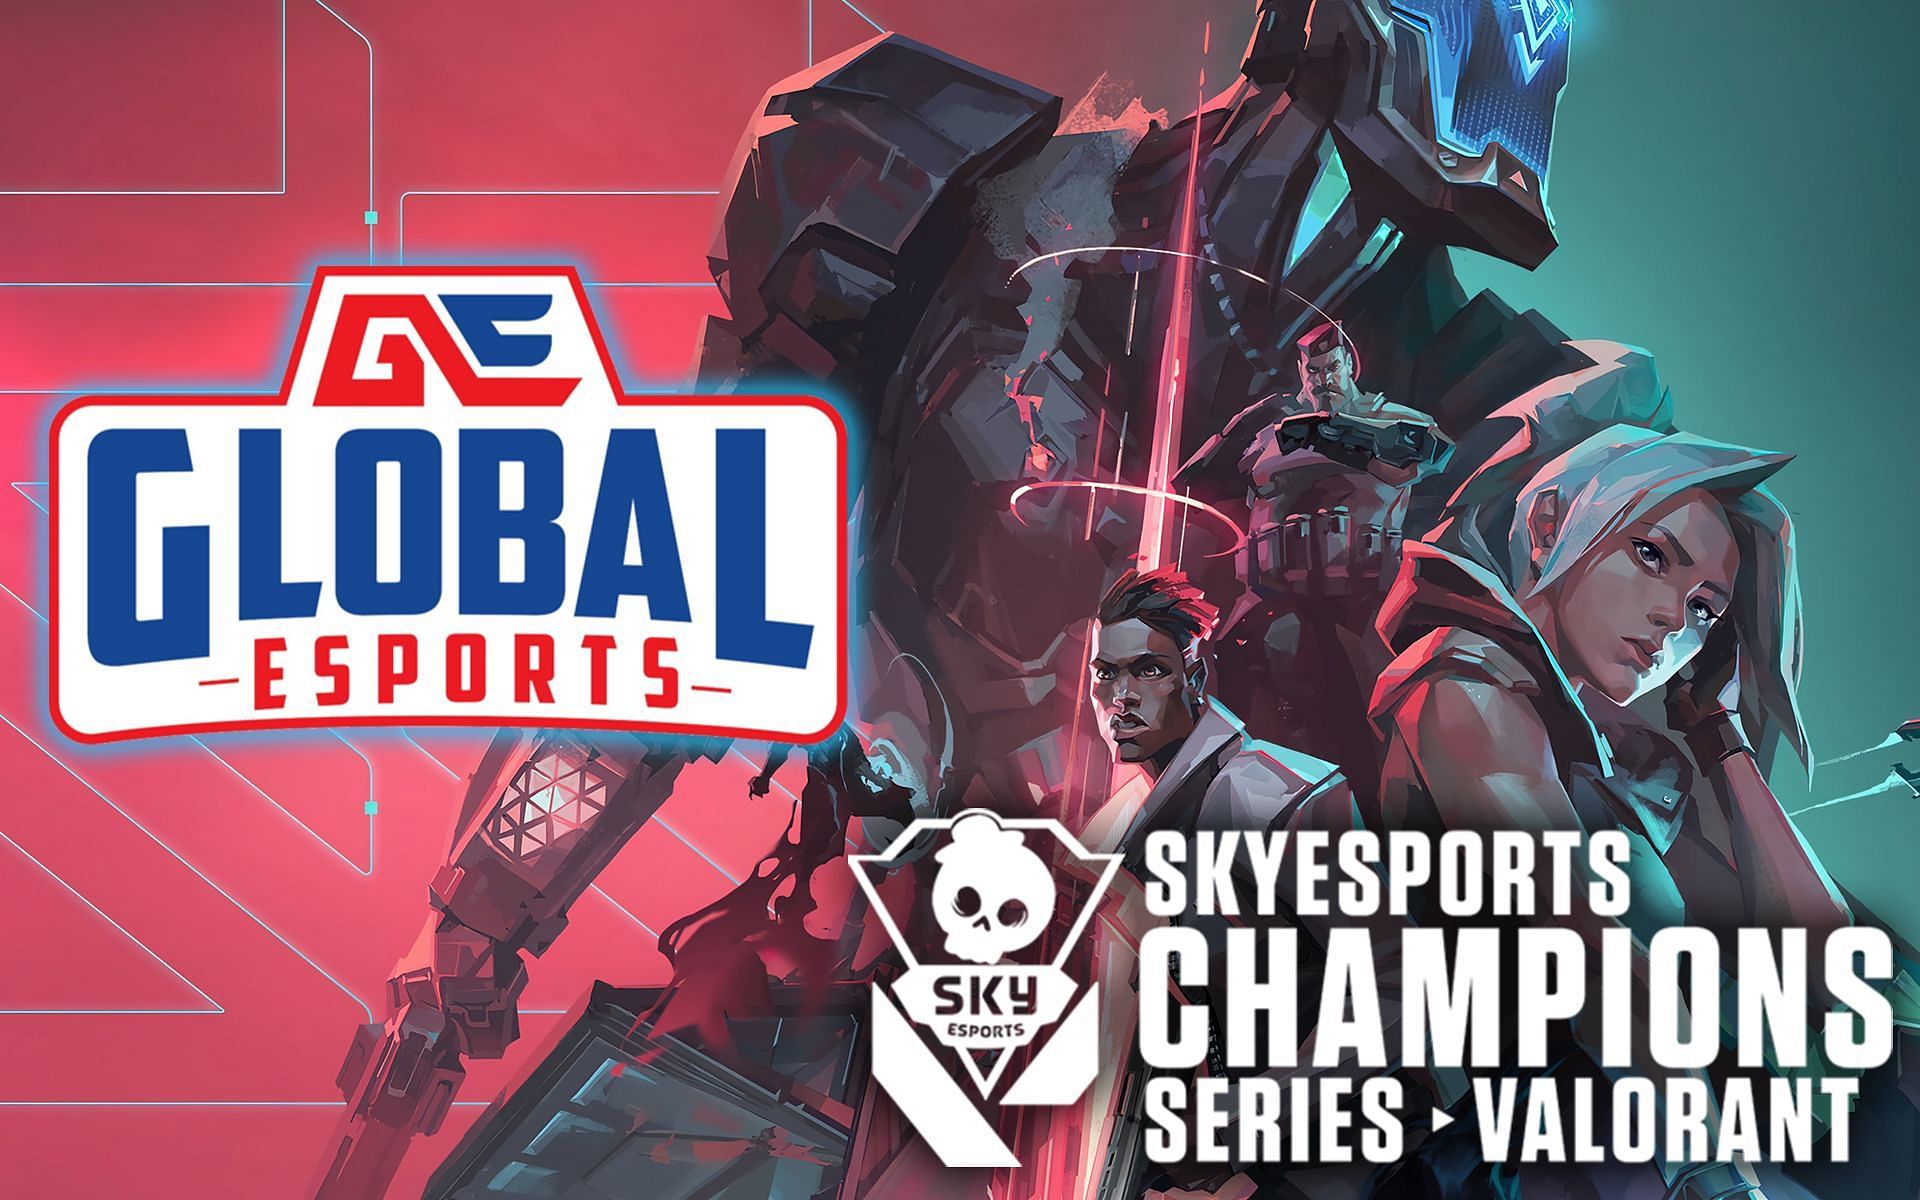 A detailed overview of everything that happened in the AMD Skyesports Champions Series Valorant tournament Day 6(Image by Sportskeeda)